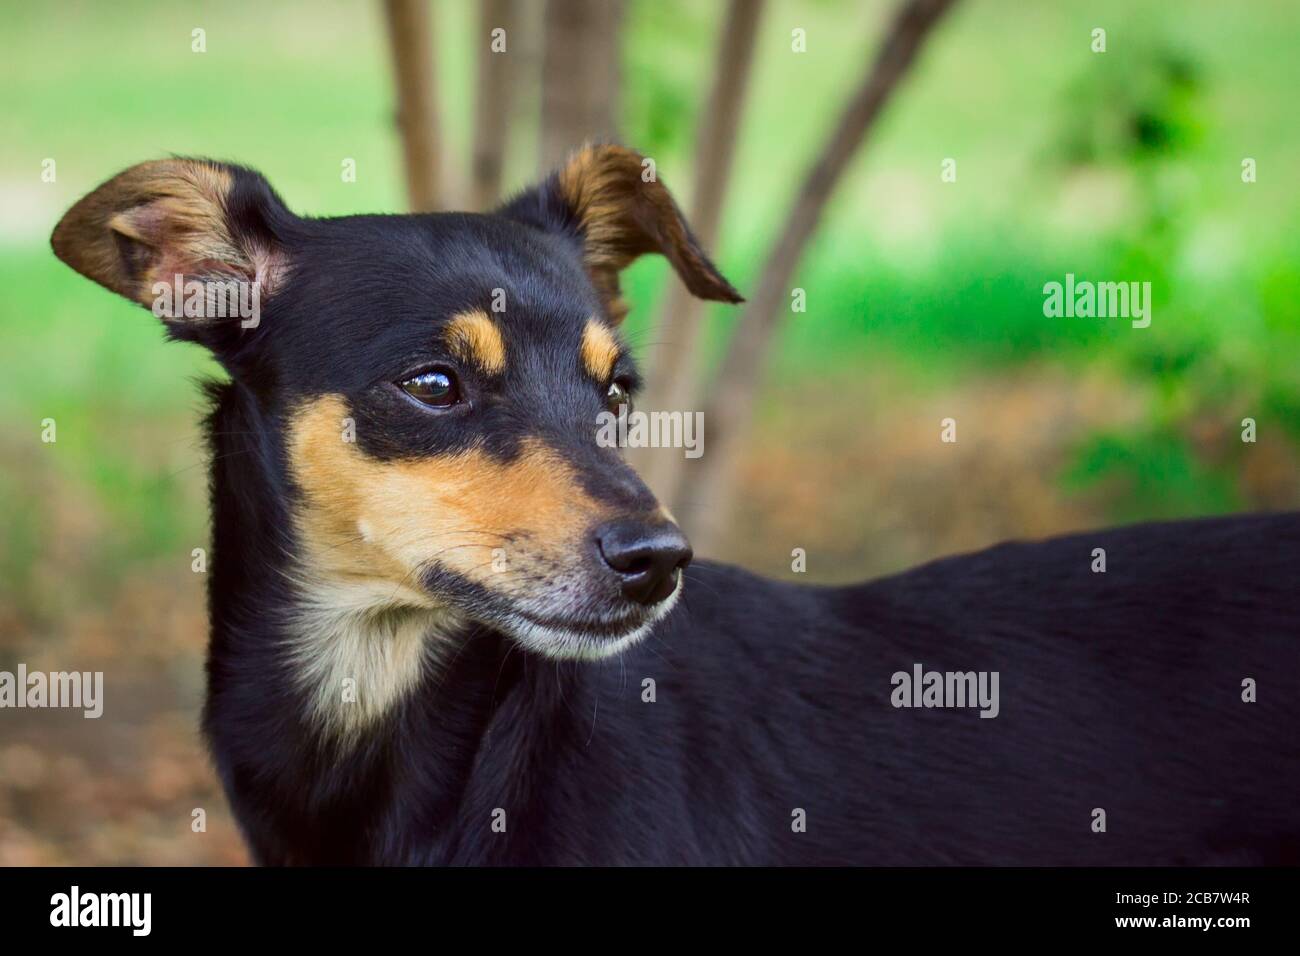 portrait of a dark dog with a multicolored face in profile concept of cute and domestic animals Stock Photo